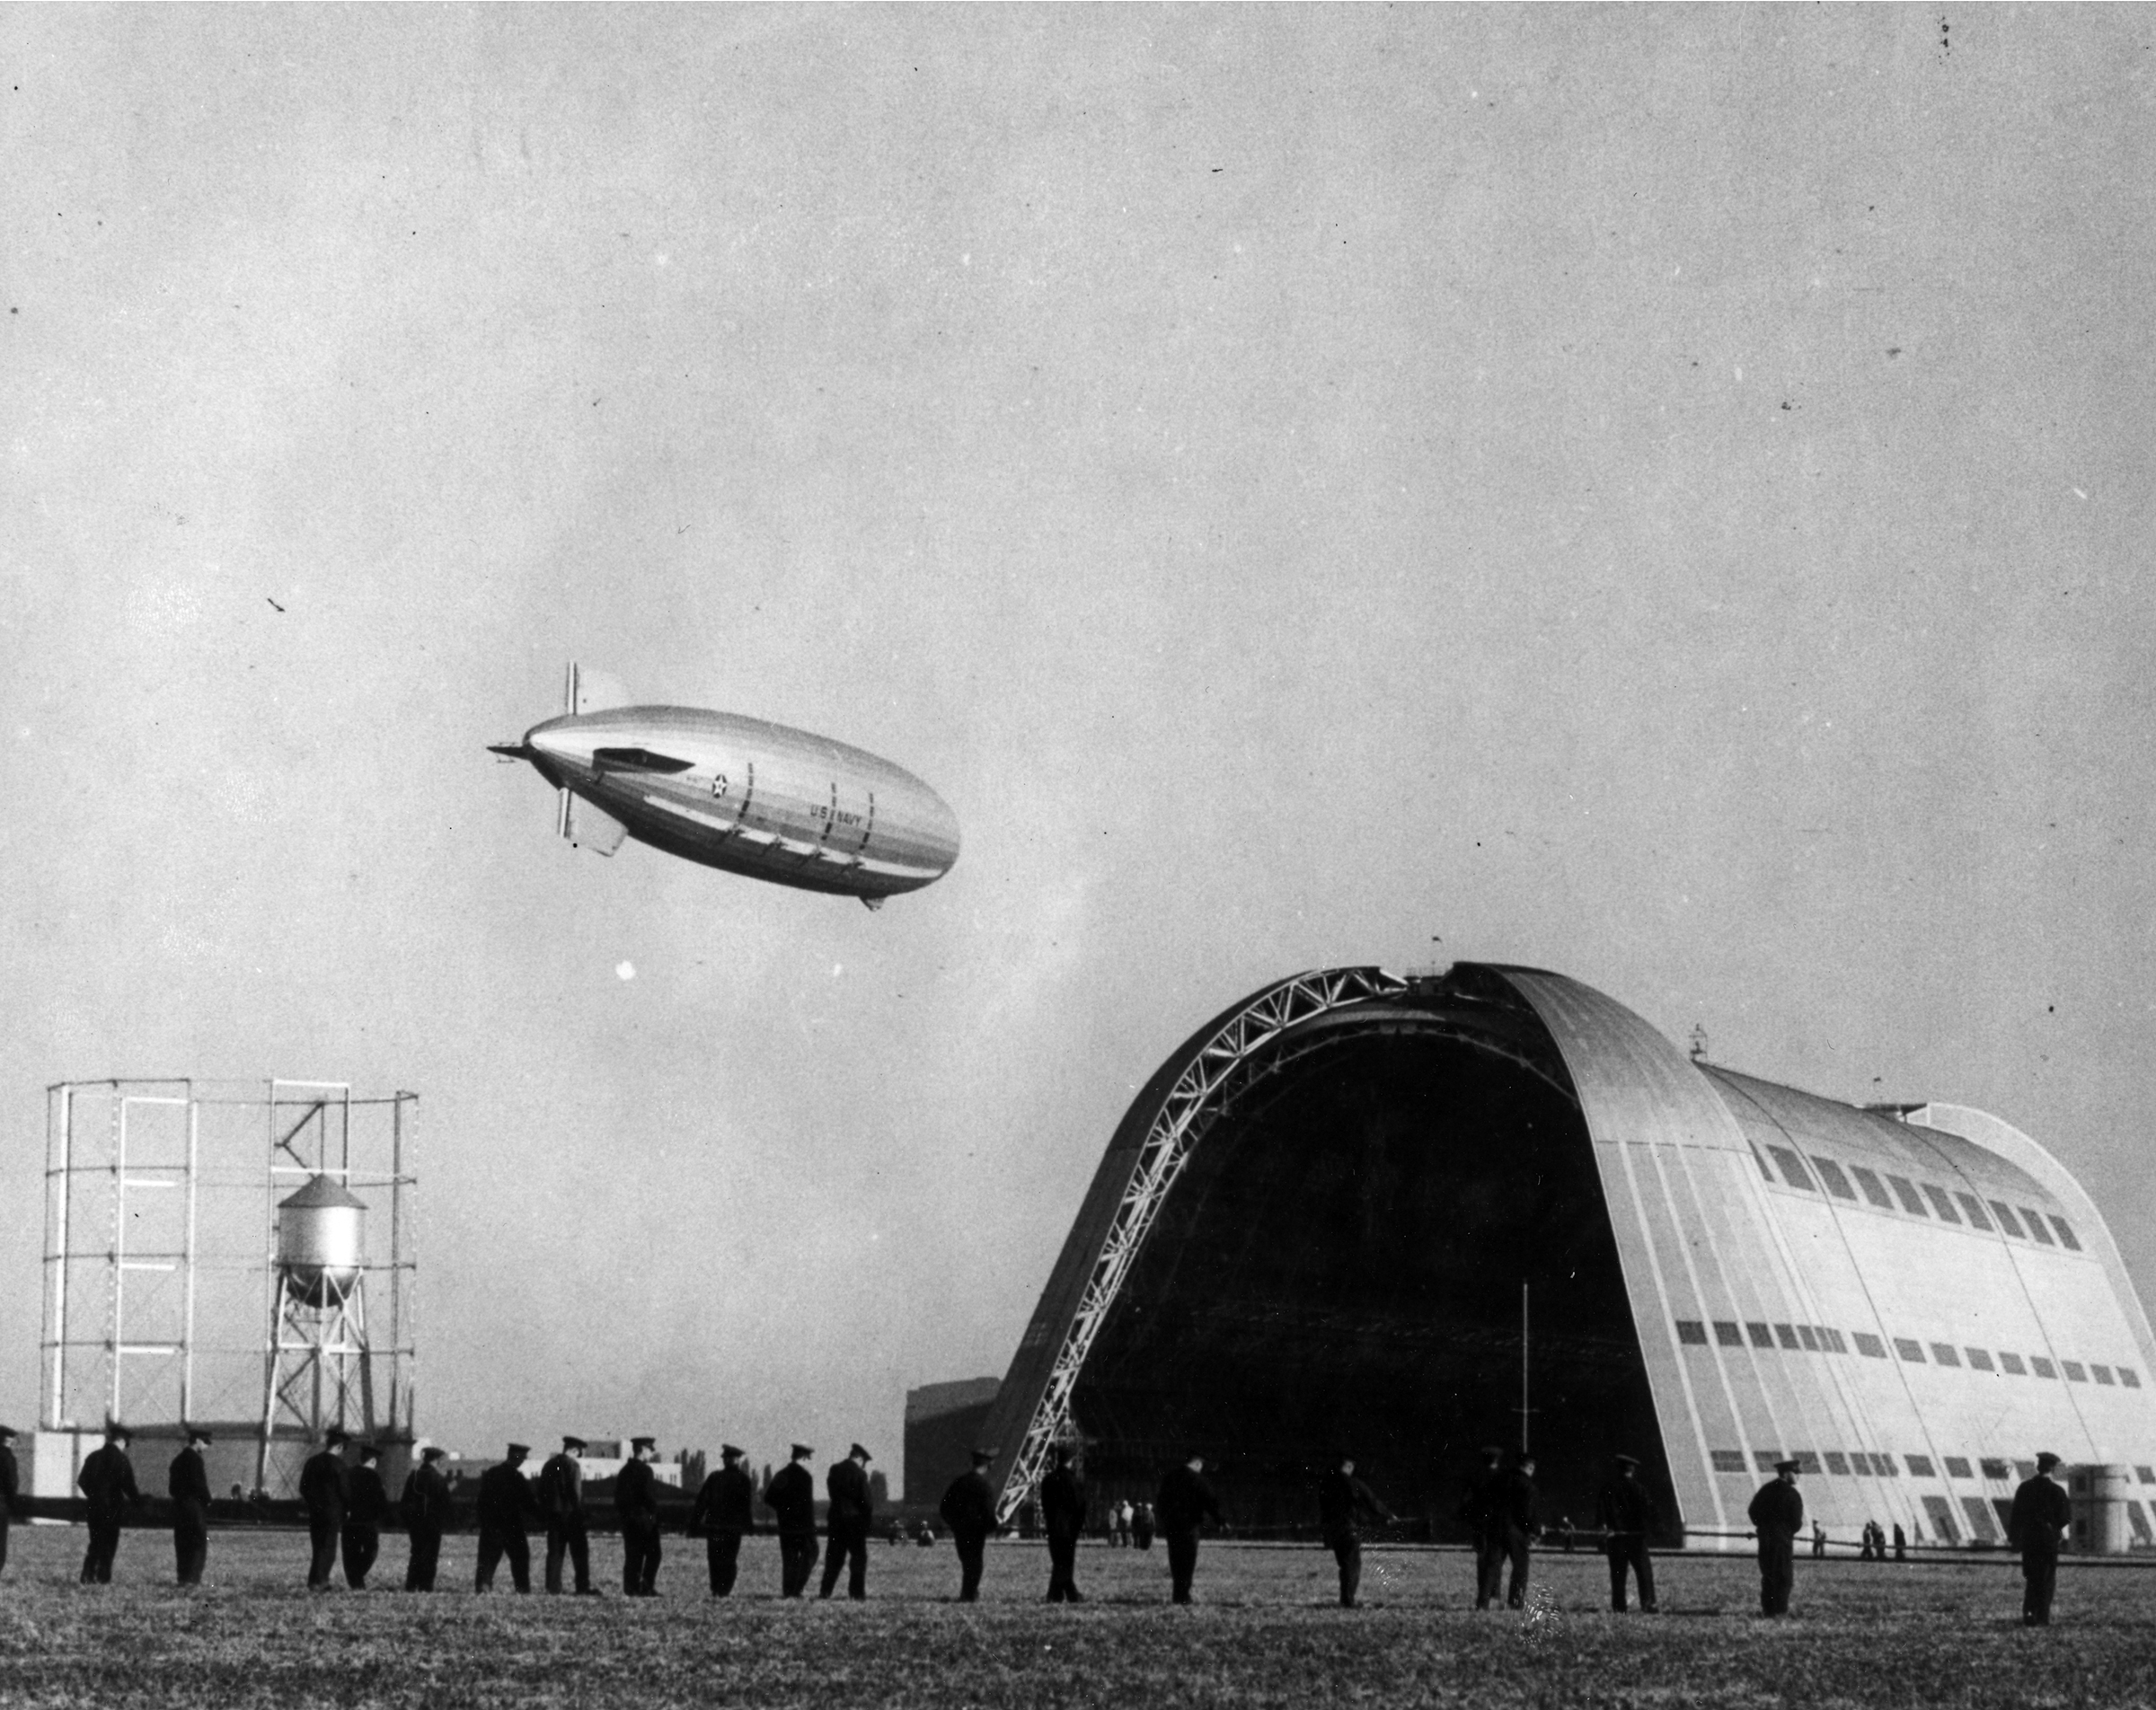 The USS Macon dirigible soars above the huge open doors of Hangar 1, a circular gasholder tower,  water tower, and a line of 21 Navy sailors.